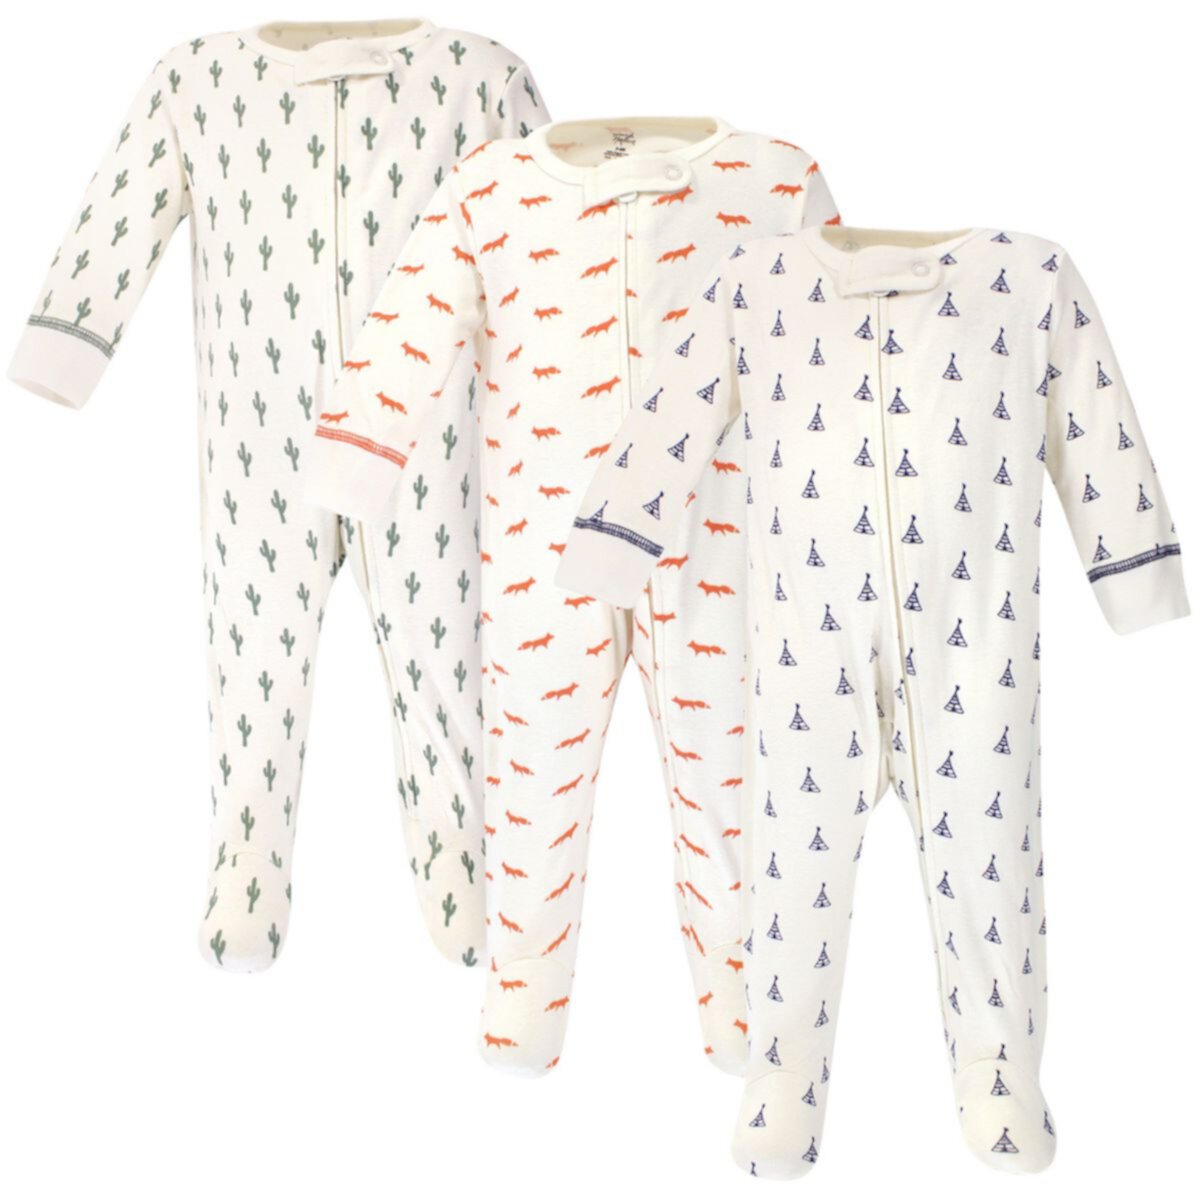 Baby Organic Cotton Zipper Sleep and Play 3pk, Cactus, Preemie Touched by Nature